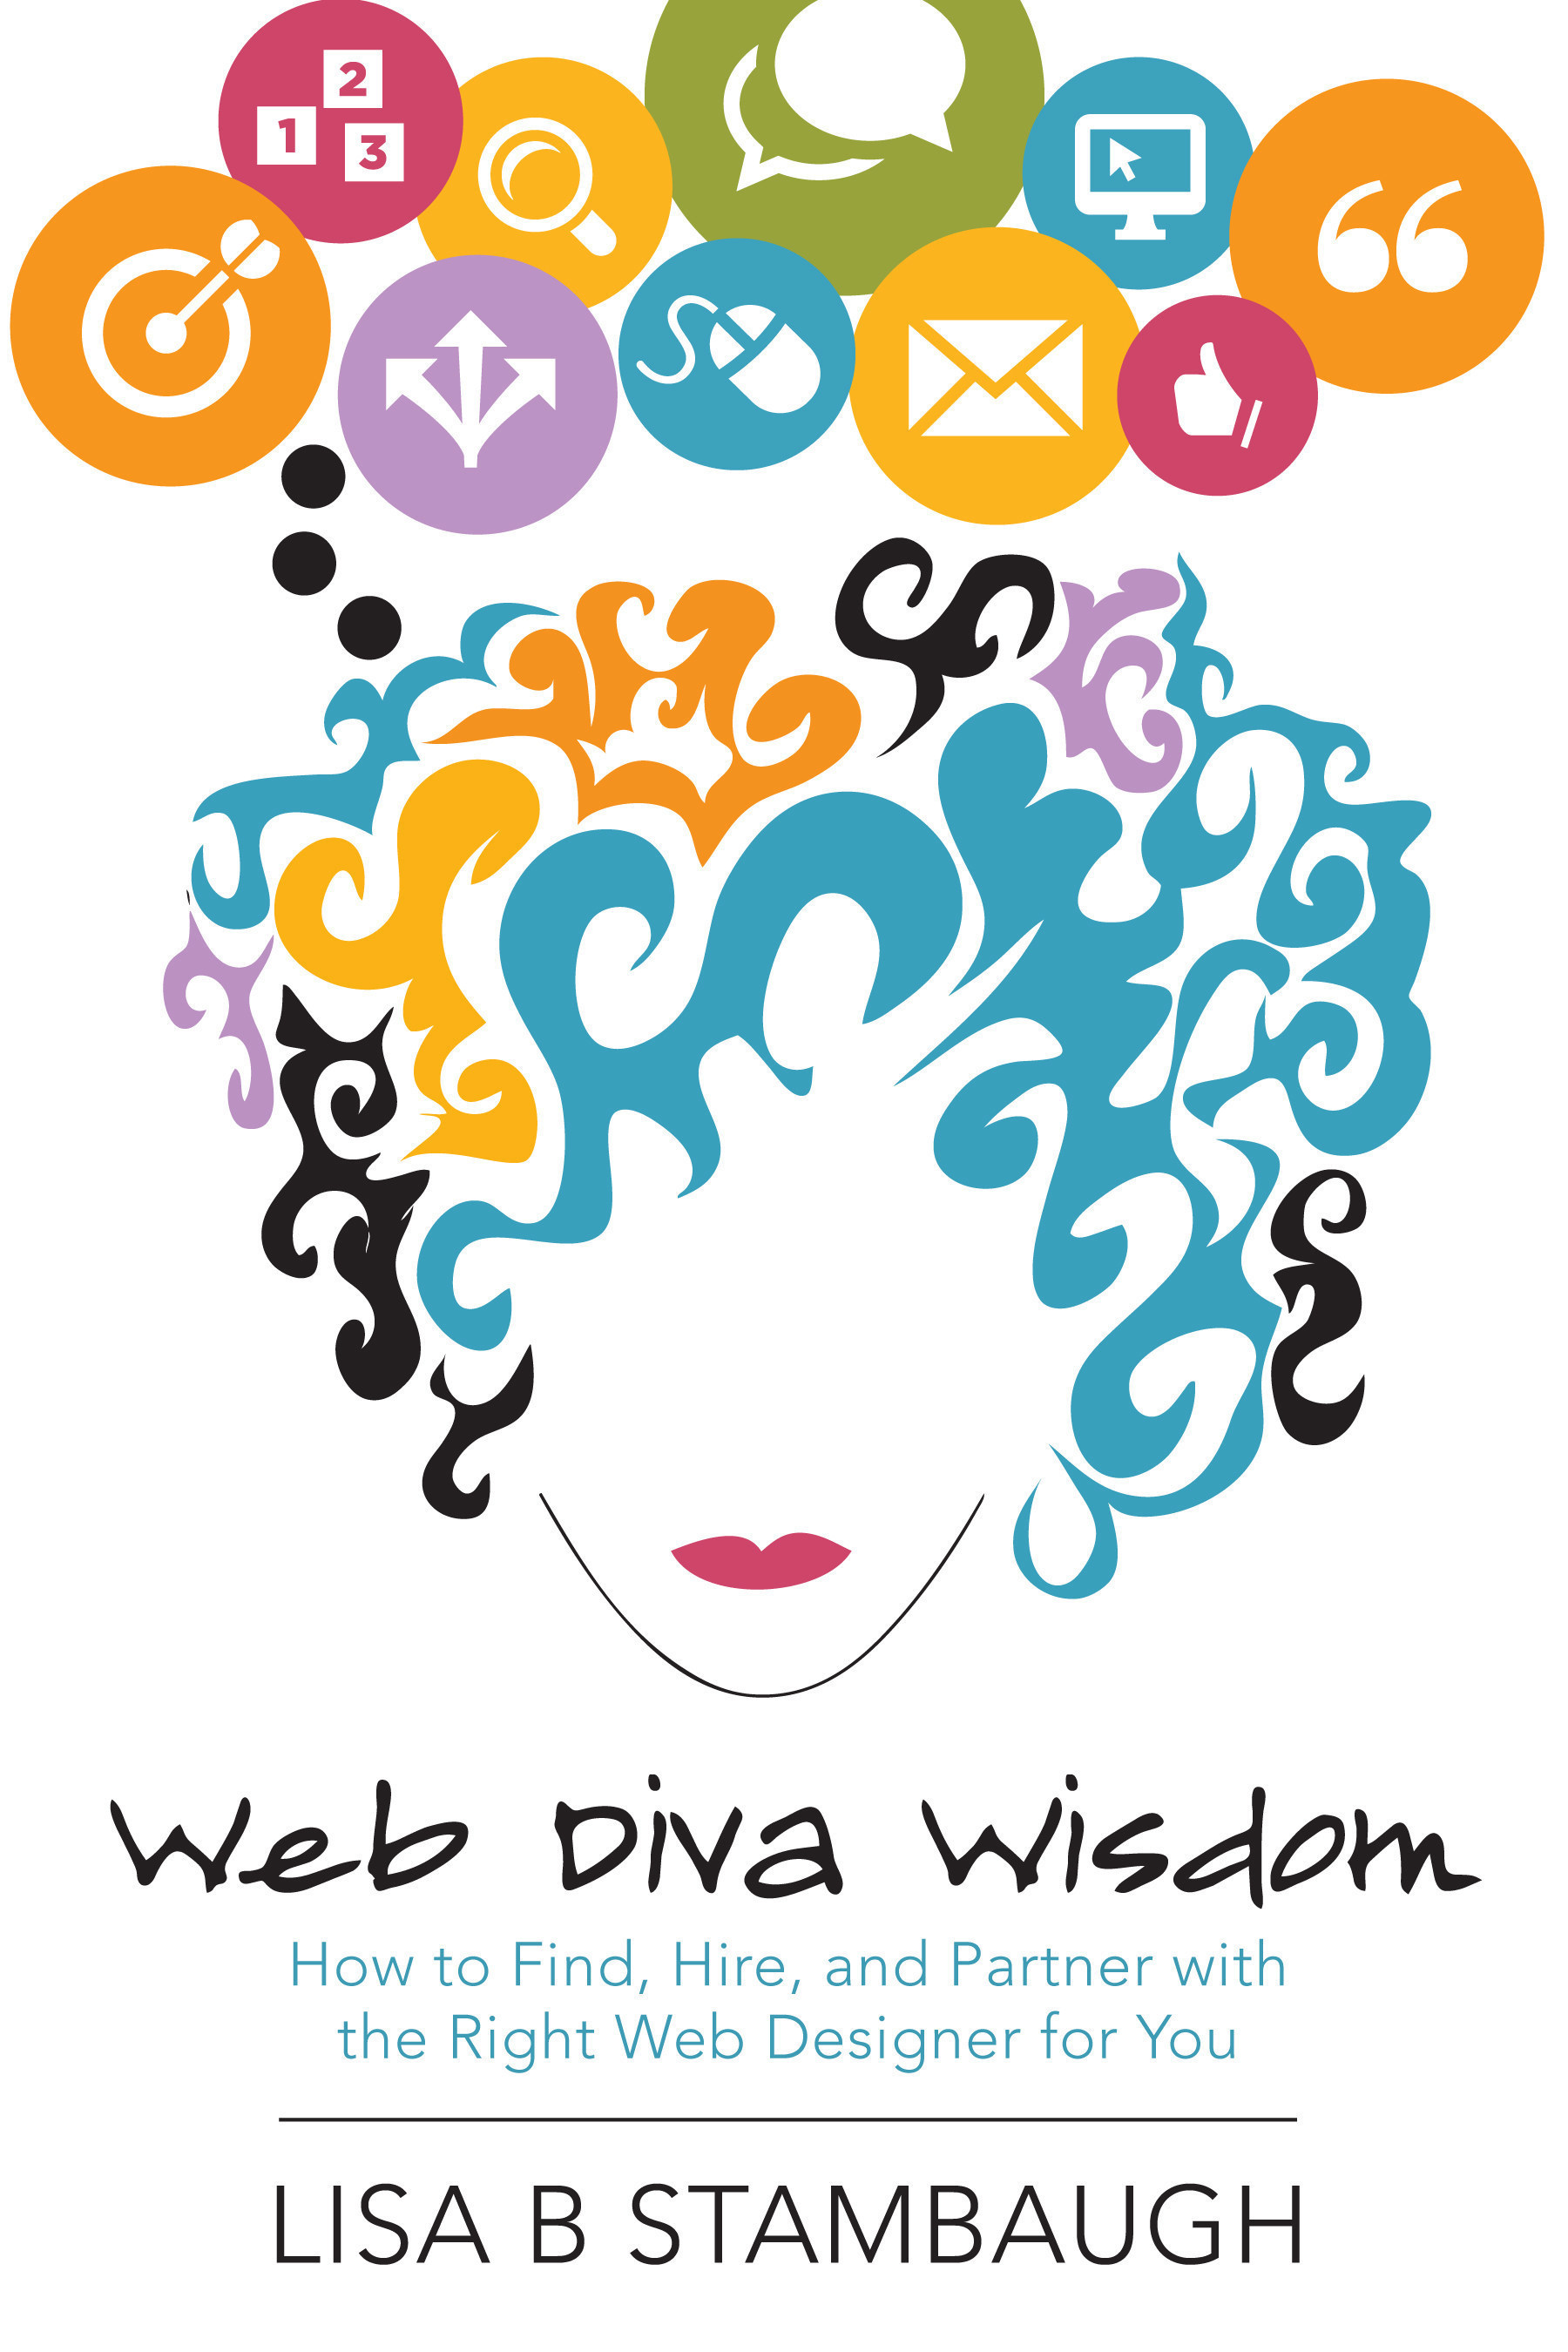 Web Diva Wisdom: How to Find, Hire, and Partner with the Right Web Designer for You, by Lisa Stambaugh, is now available in paperback and Kindle formats on Amazon. (PRNewsFoto/Lisa Stambaugh)